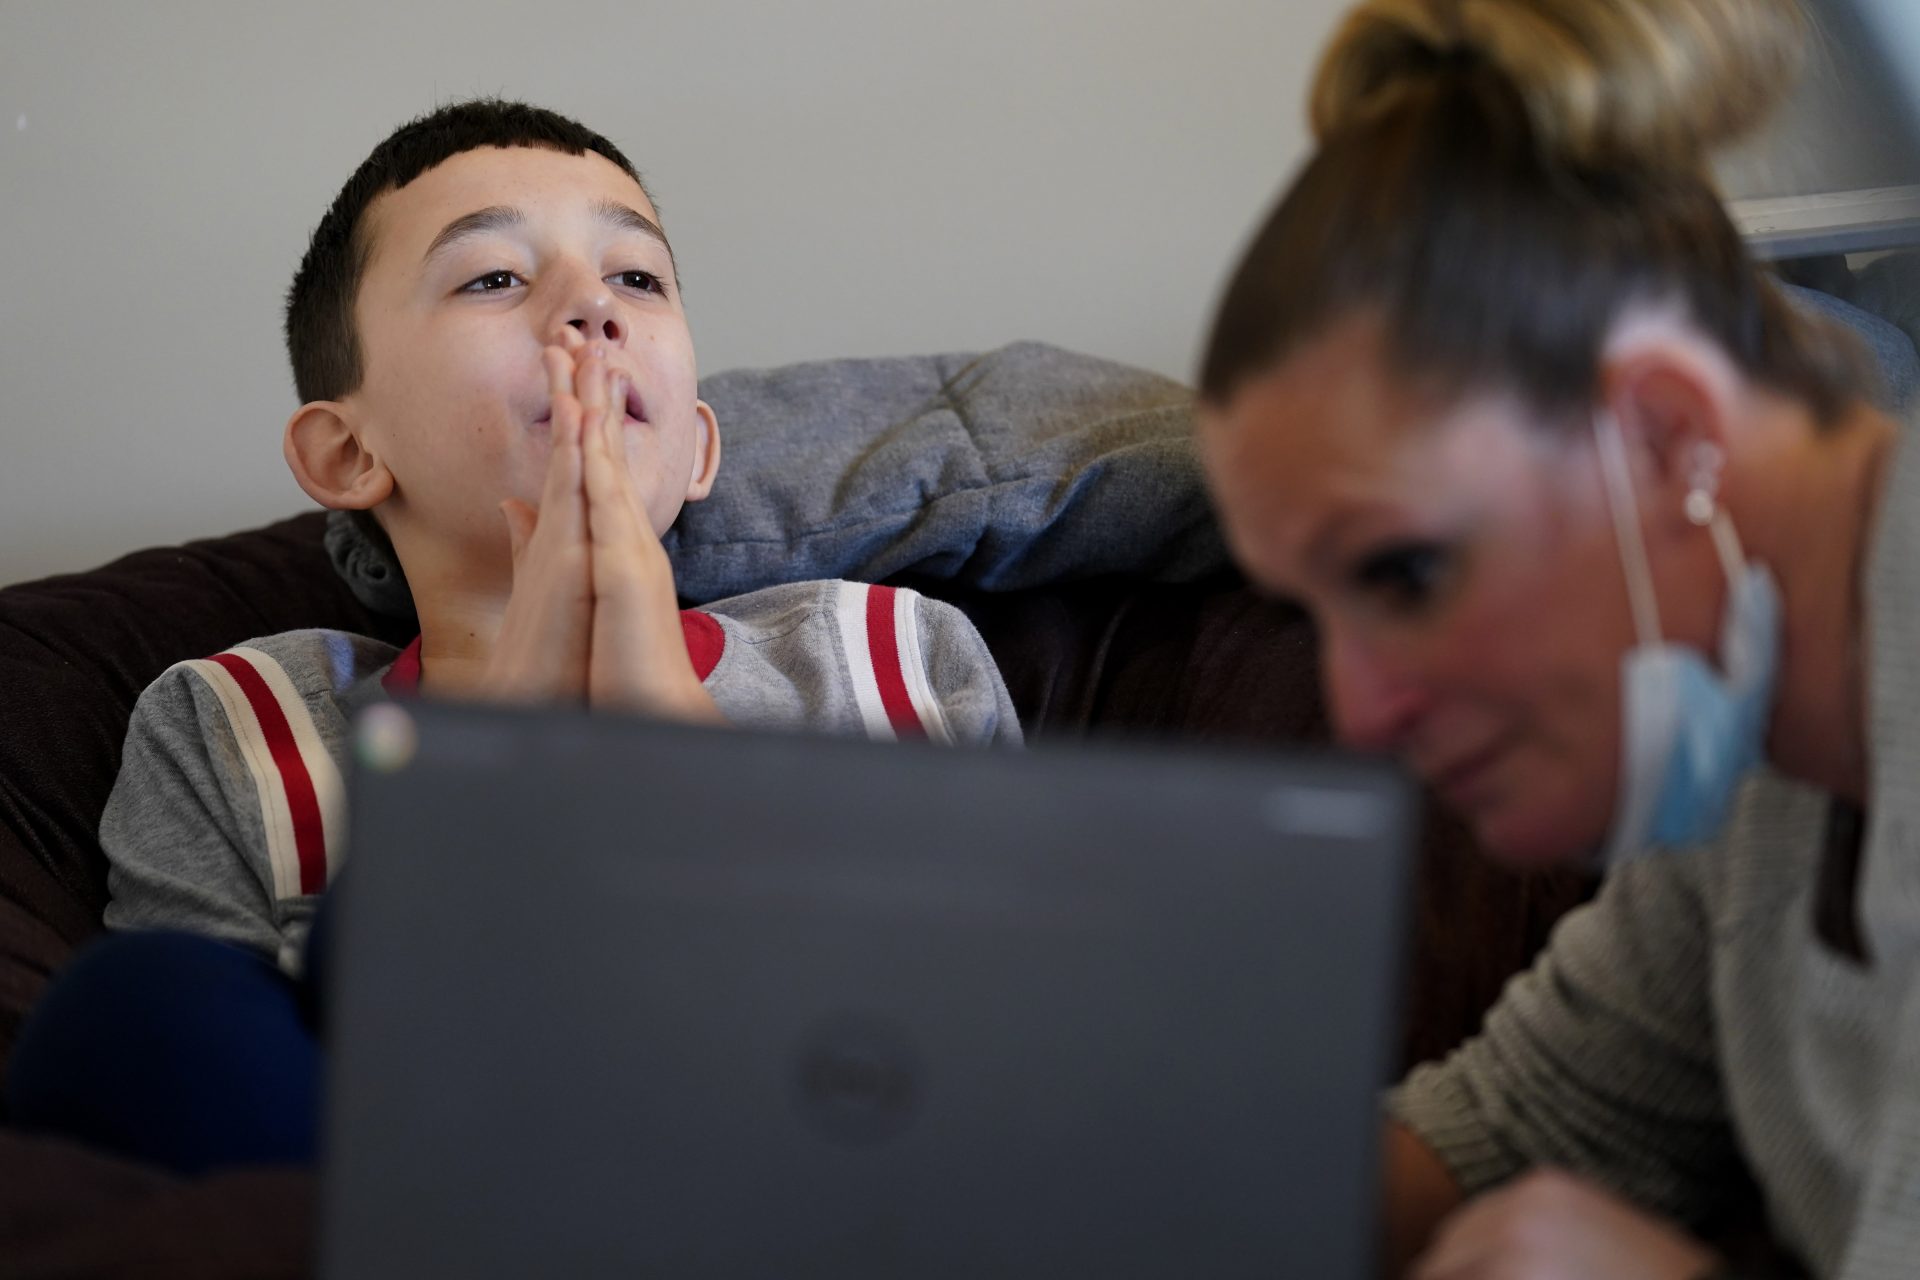 Paraprofessional Jessica Wein helps Josh Nazzaro with his school work while attending class virtually from his home in Wharton, N.J., Wednesday, Nov. 18, 2020.